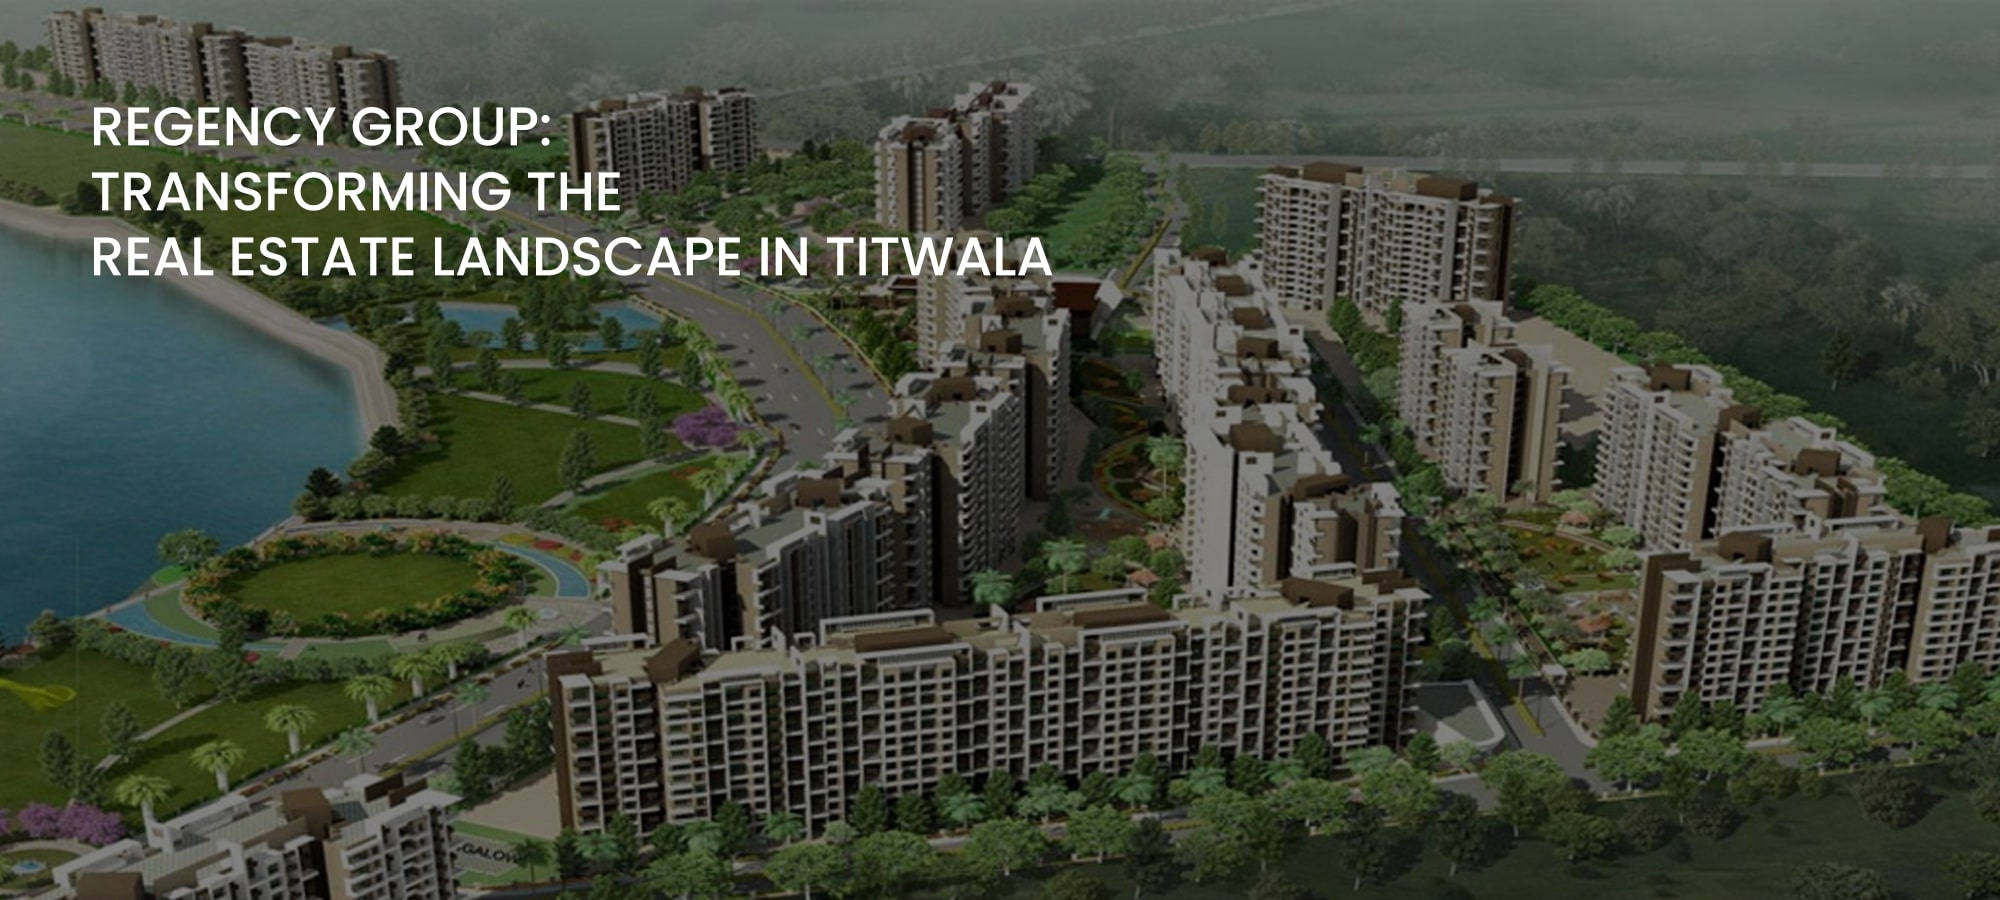 Regency Group: Transforming the Real Estate Landscape in Titwala